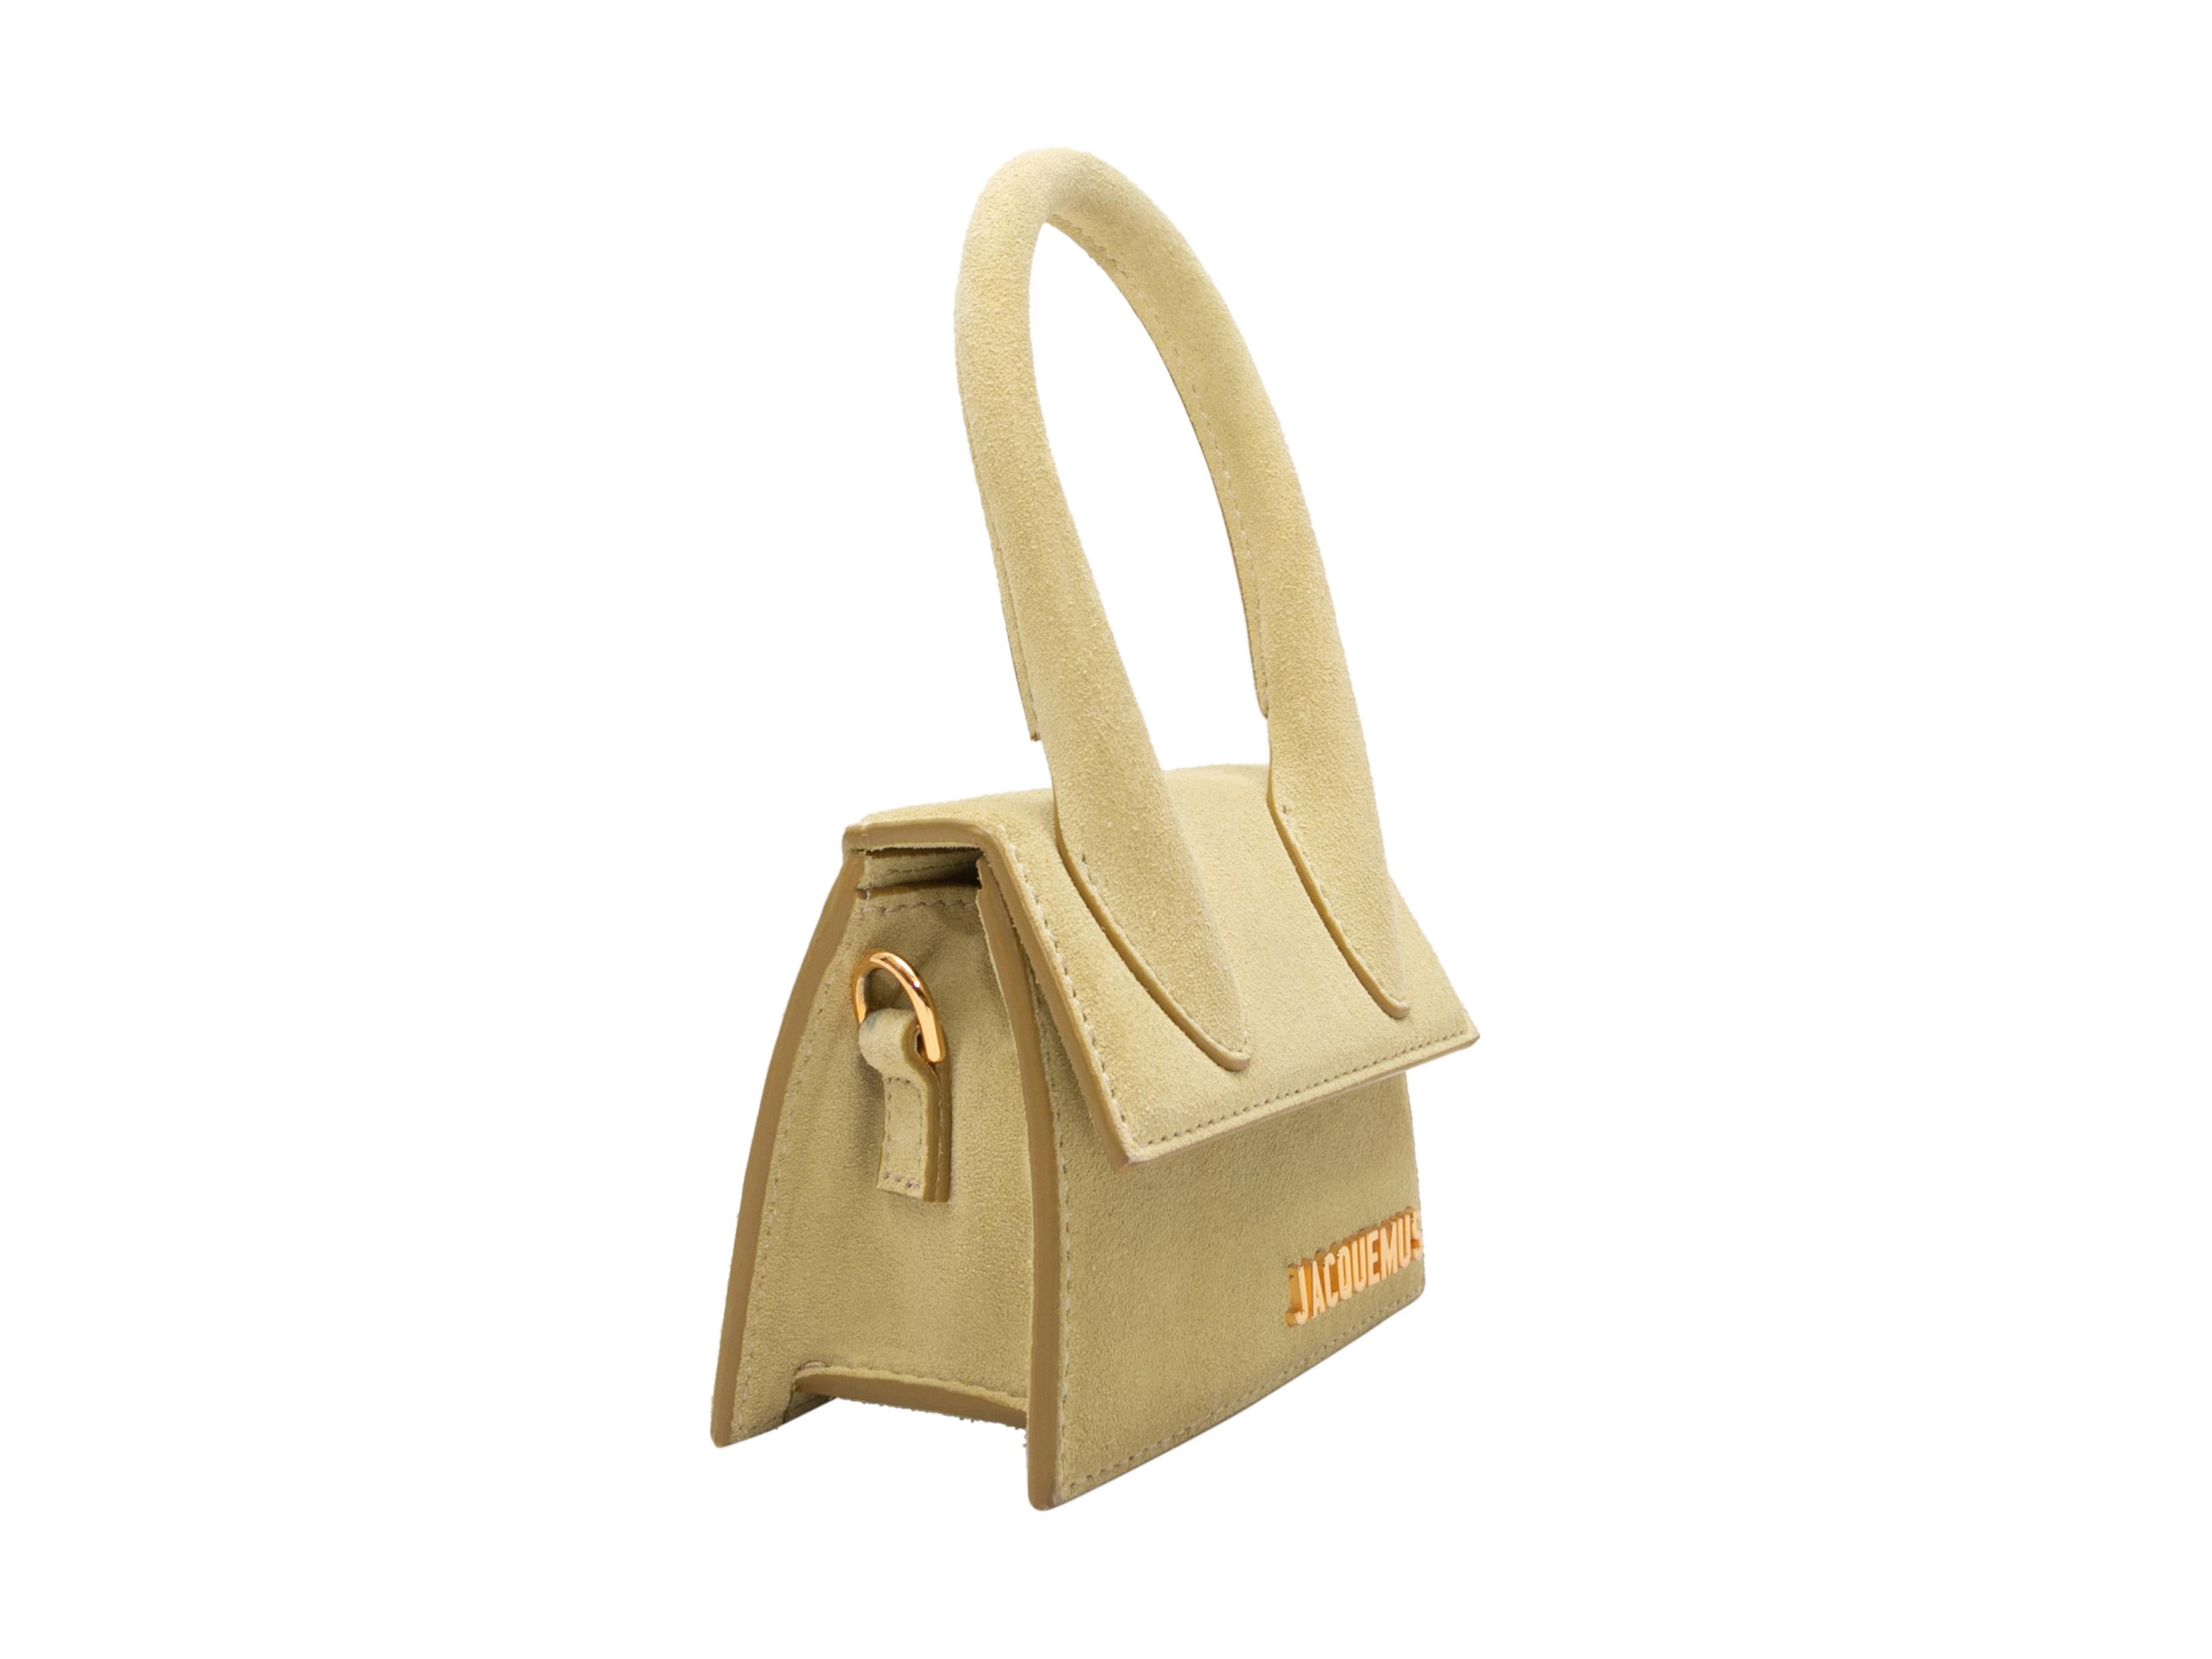 Chartreuse Jacquemus Suede Mini Crossbody Bag. This bag features a suede body, gold-tone hardware, a single rolled top handle, a single flat shoulder strap, and a front flap closure. 4.75